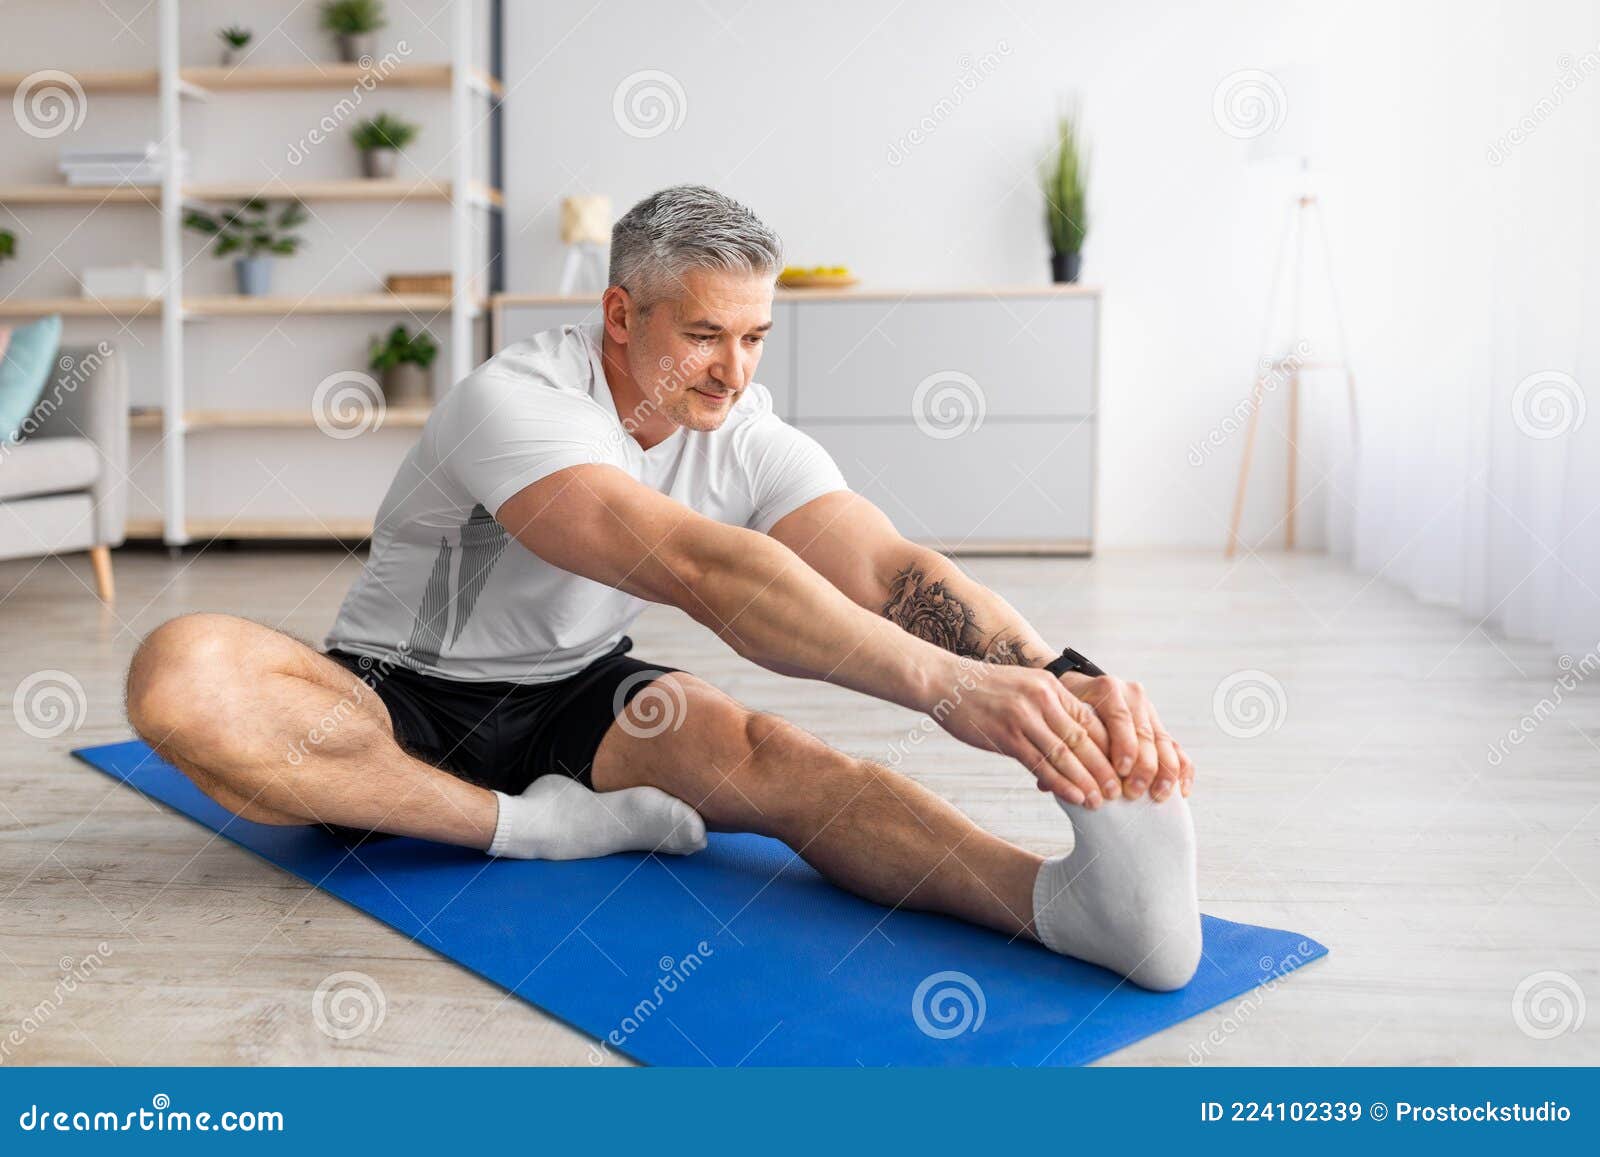 Flexibility exercises. Athletic young woman doing yoga on mat, stretching  her legs during home Stock Photo by Prostock-studio